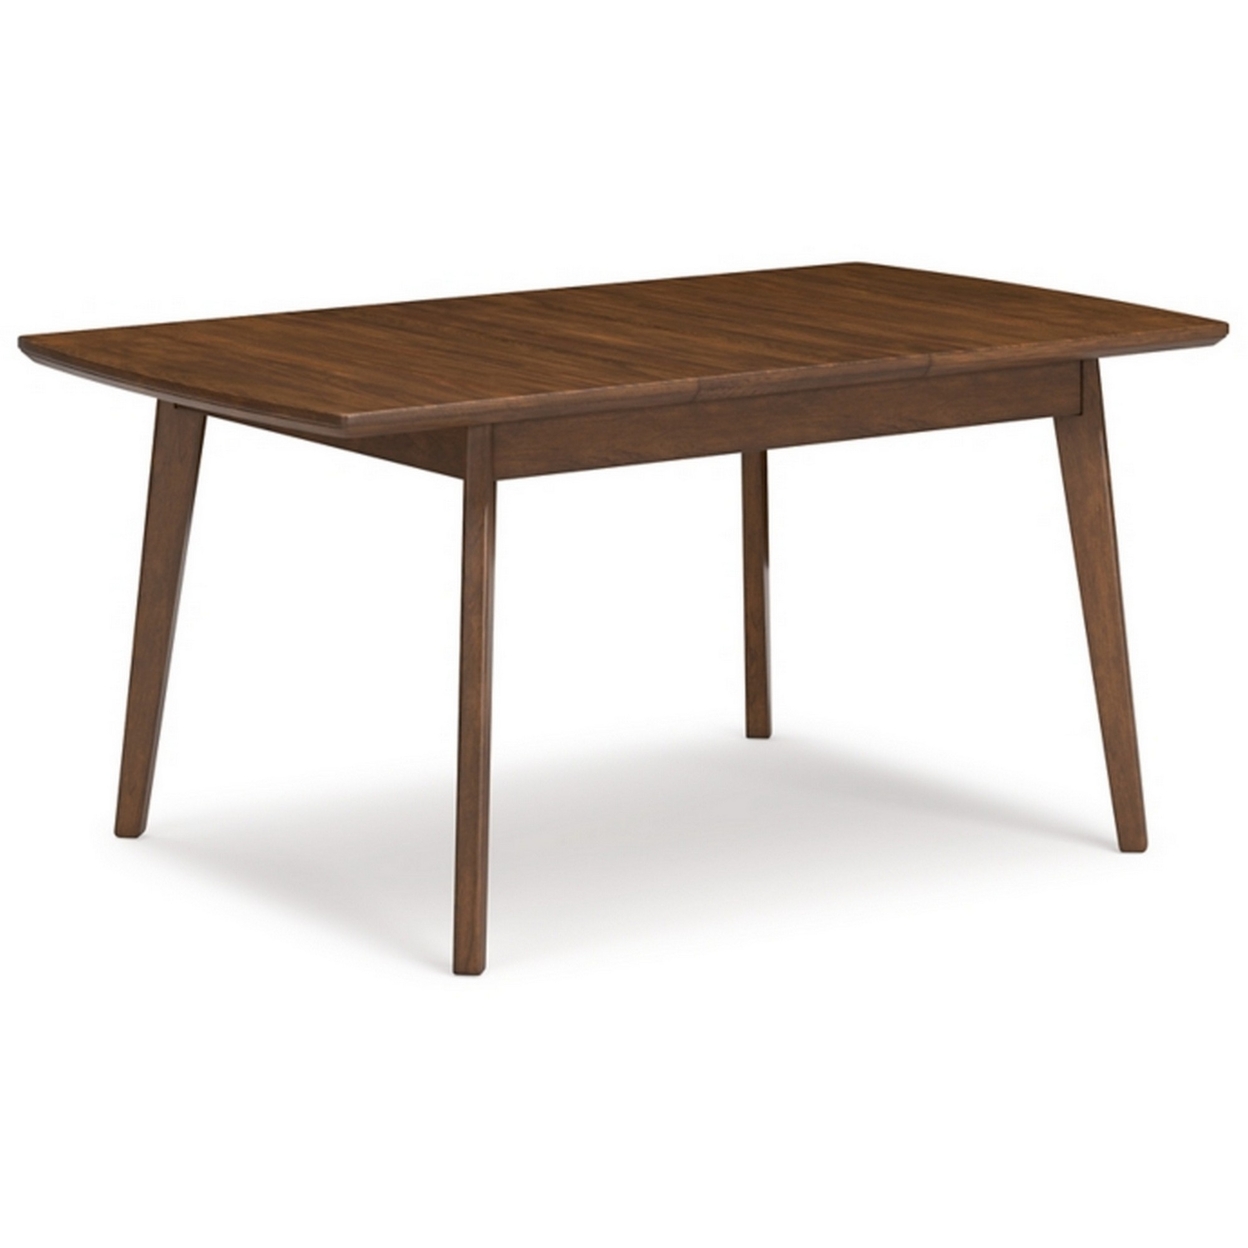 64 Inch Wood Extendable Dining Table With Tapered Legs, Wood Grain, Brown- Saltoro Sherpi